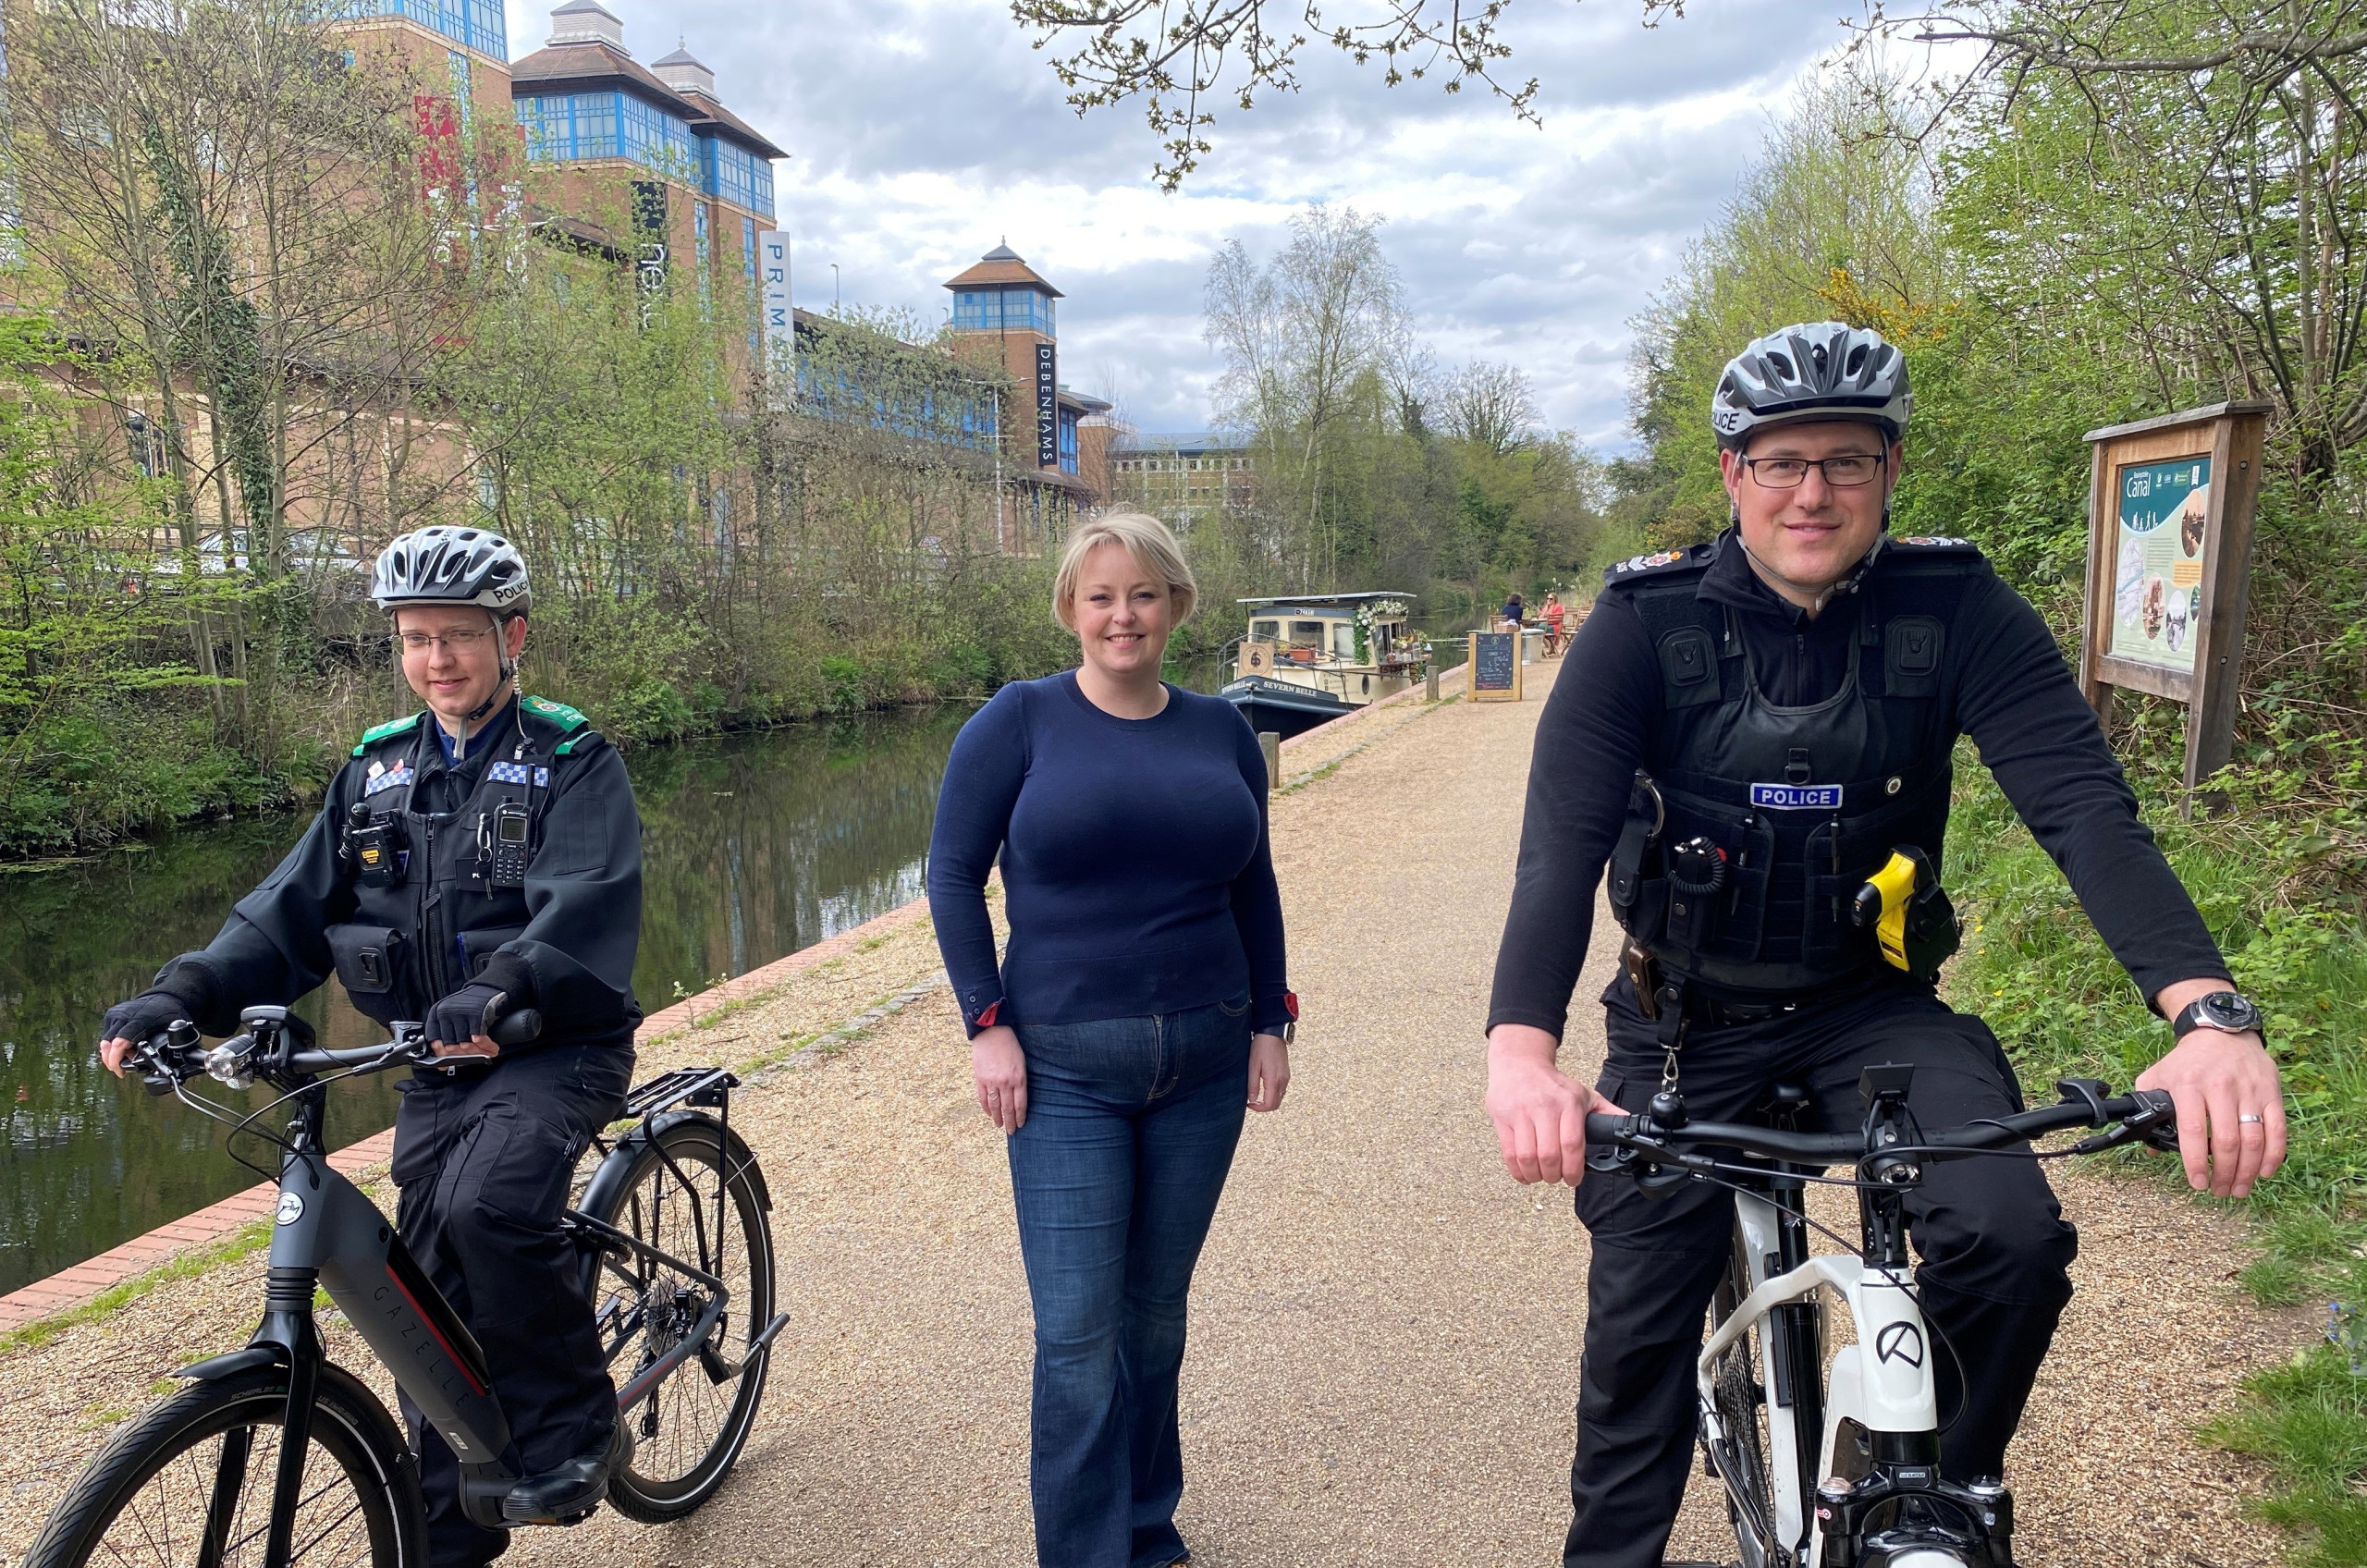 Police and Crime Commissioner Lisa Townsend with local police officers on bikes next to the Woking canal